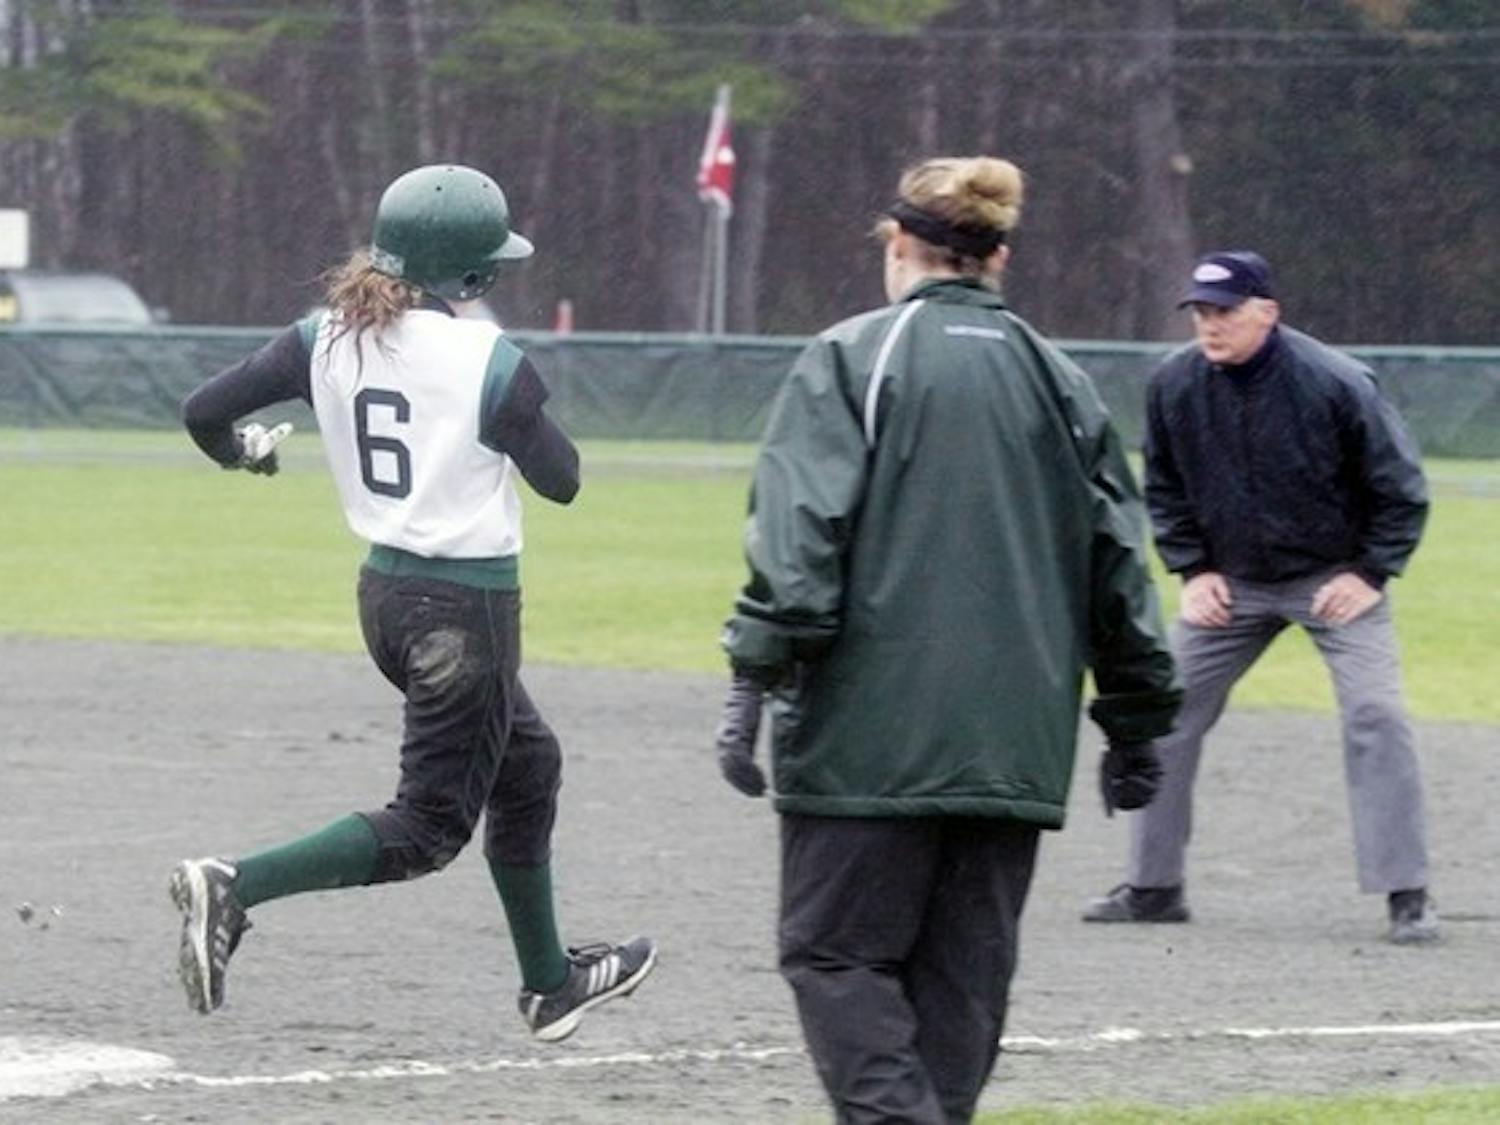 Second baseman Sarah Bankoff '08 recorded four hits in just six at-bats in the Big Green's doubleheader sweep of Yale on Saturday.